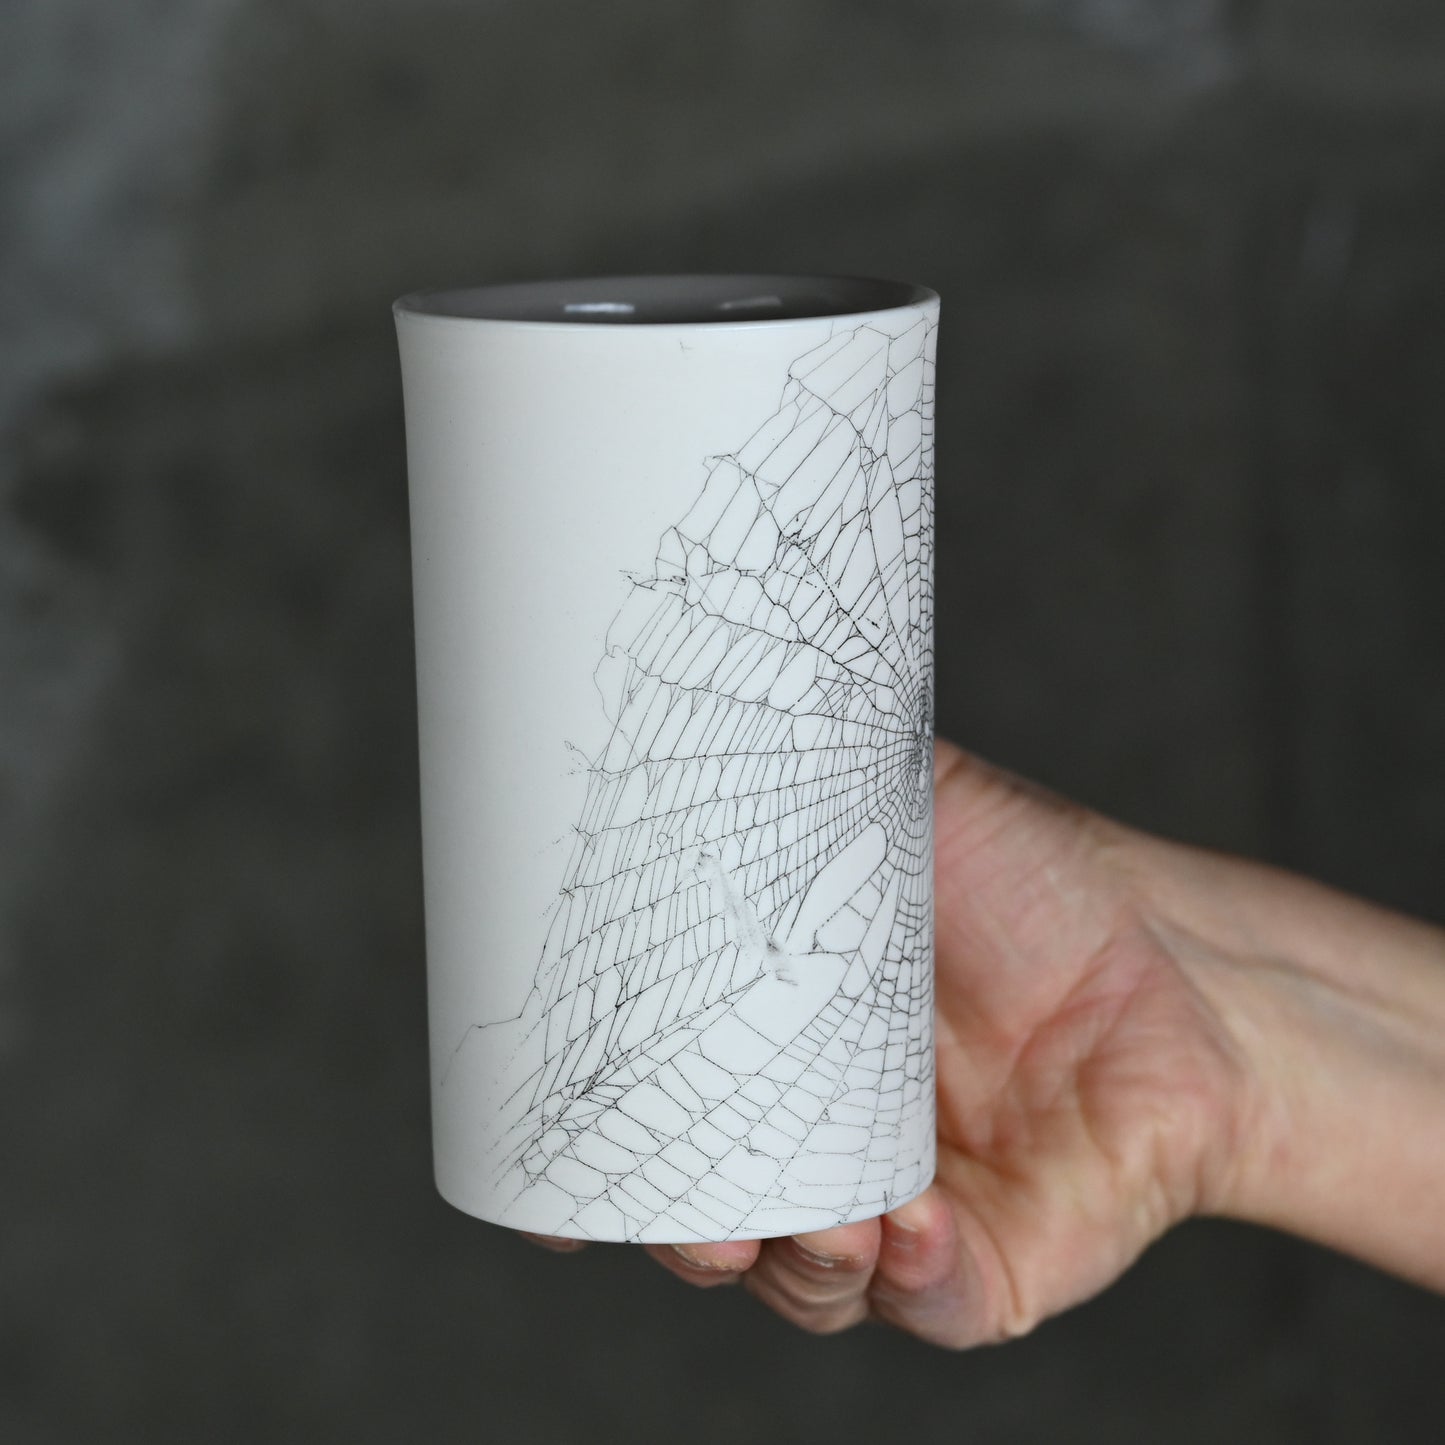 Web on Clay (167), Collected September 17, 2022